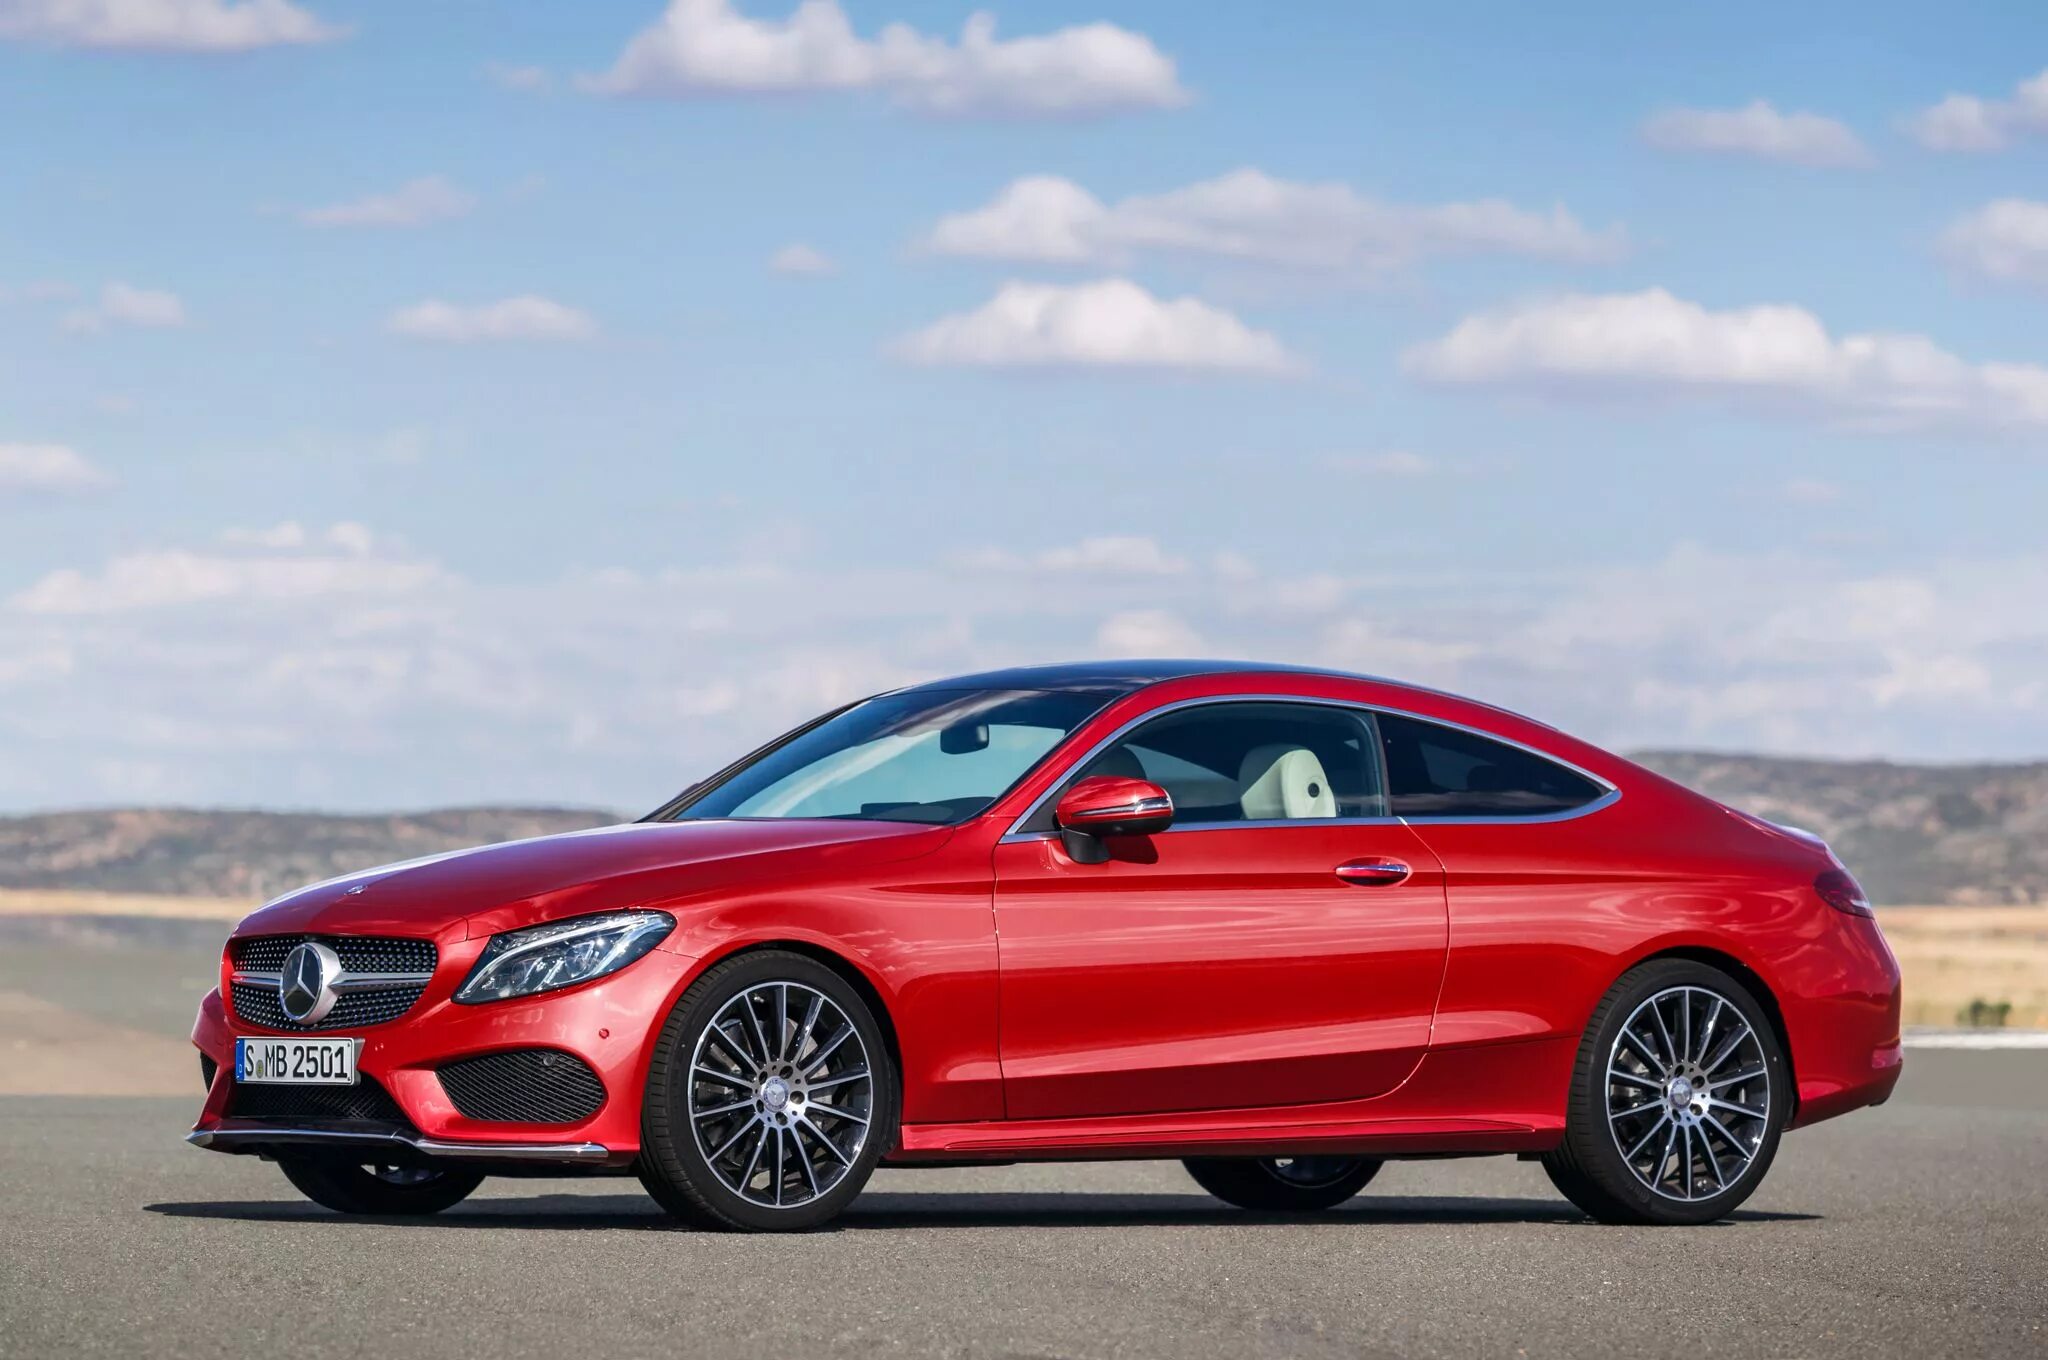 Мерседес c class Coupe. Mercedes Benz c250d. Mercedes Benz c class Coupe 2016. Mercedes c купе 2016. Mercedes c class coupe